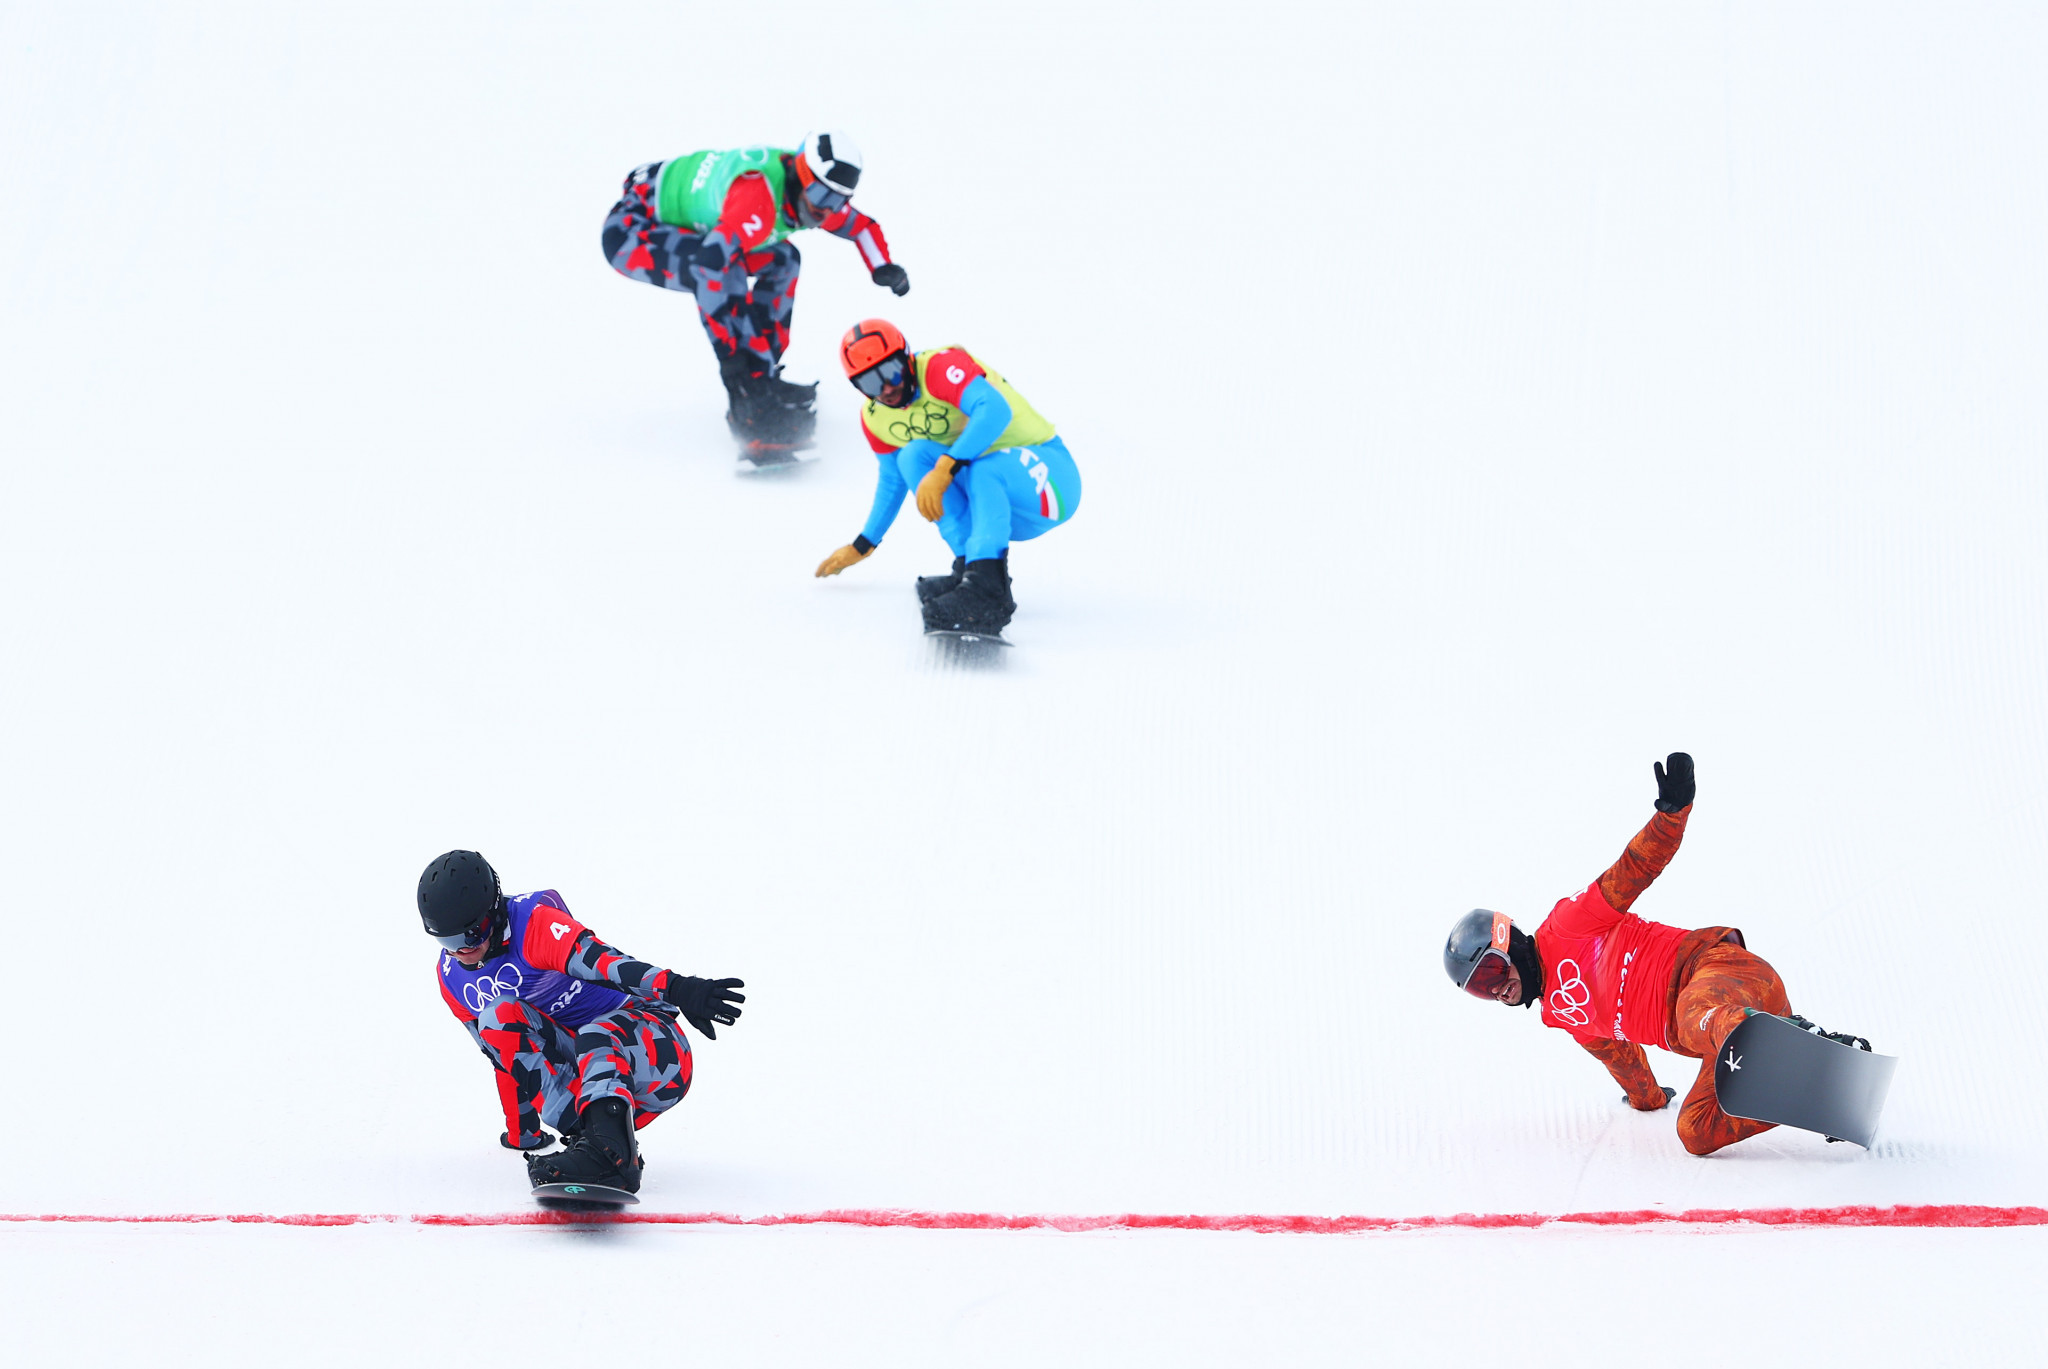 Alessandro Hämmerle of Austria pipped Canada's Eliot Grondin to the line in the big final ©Getty Images